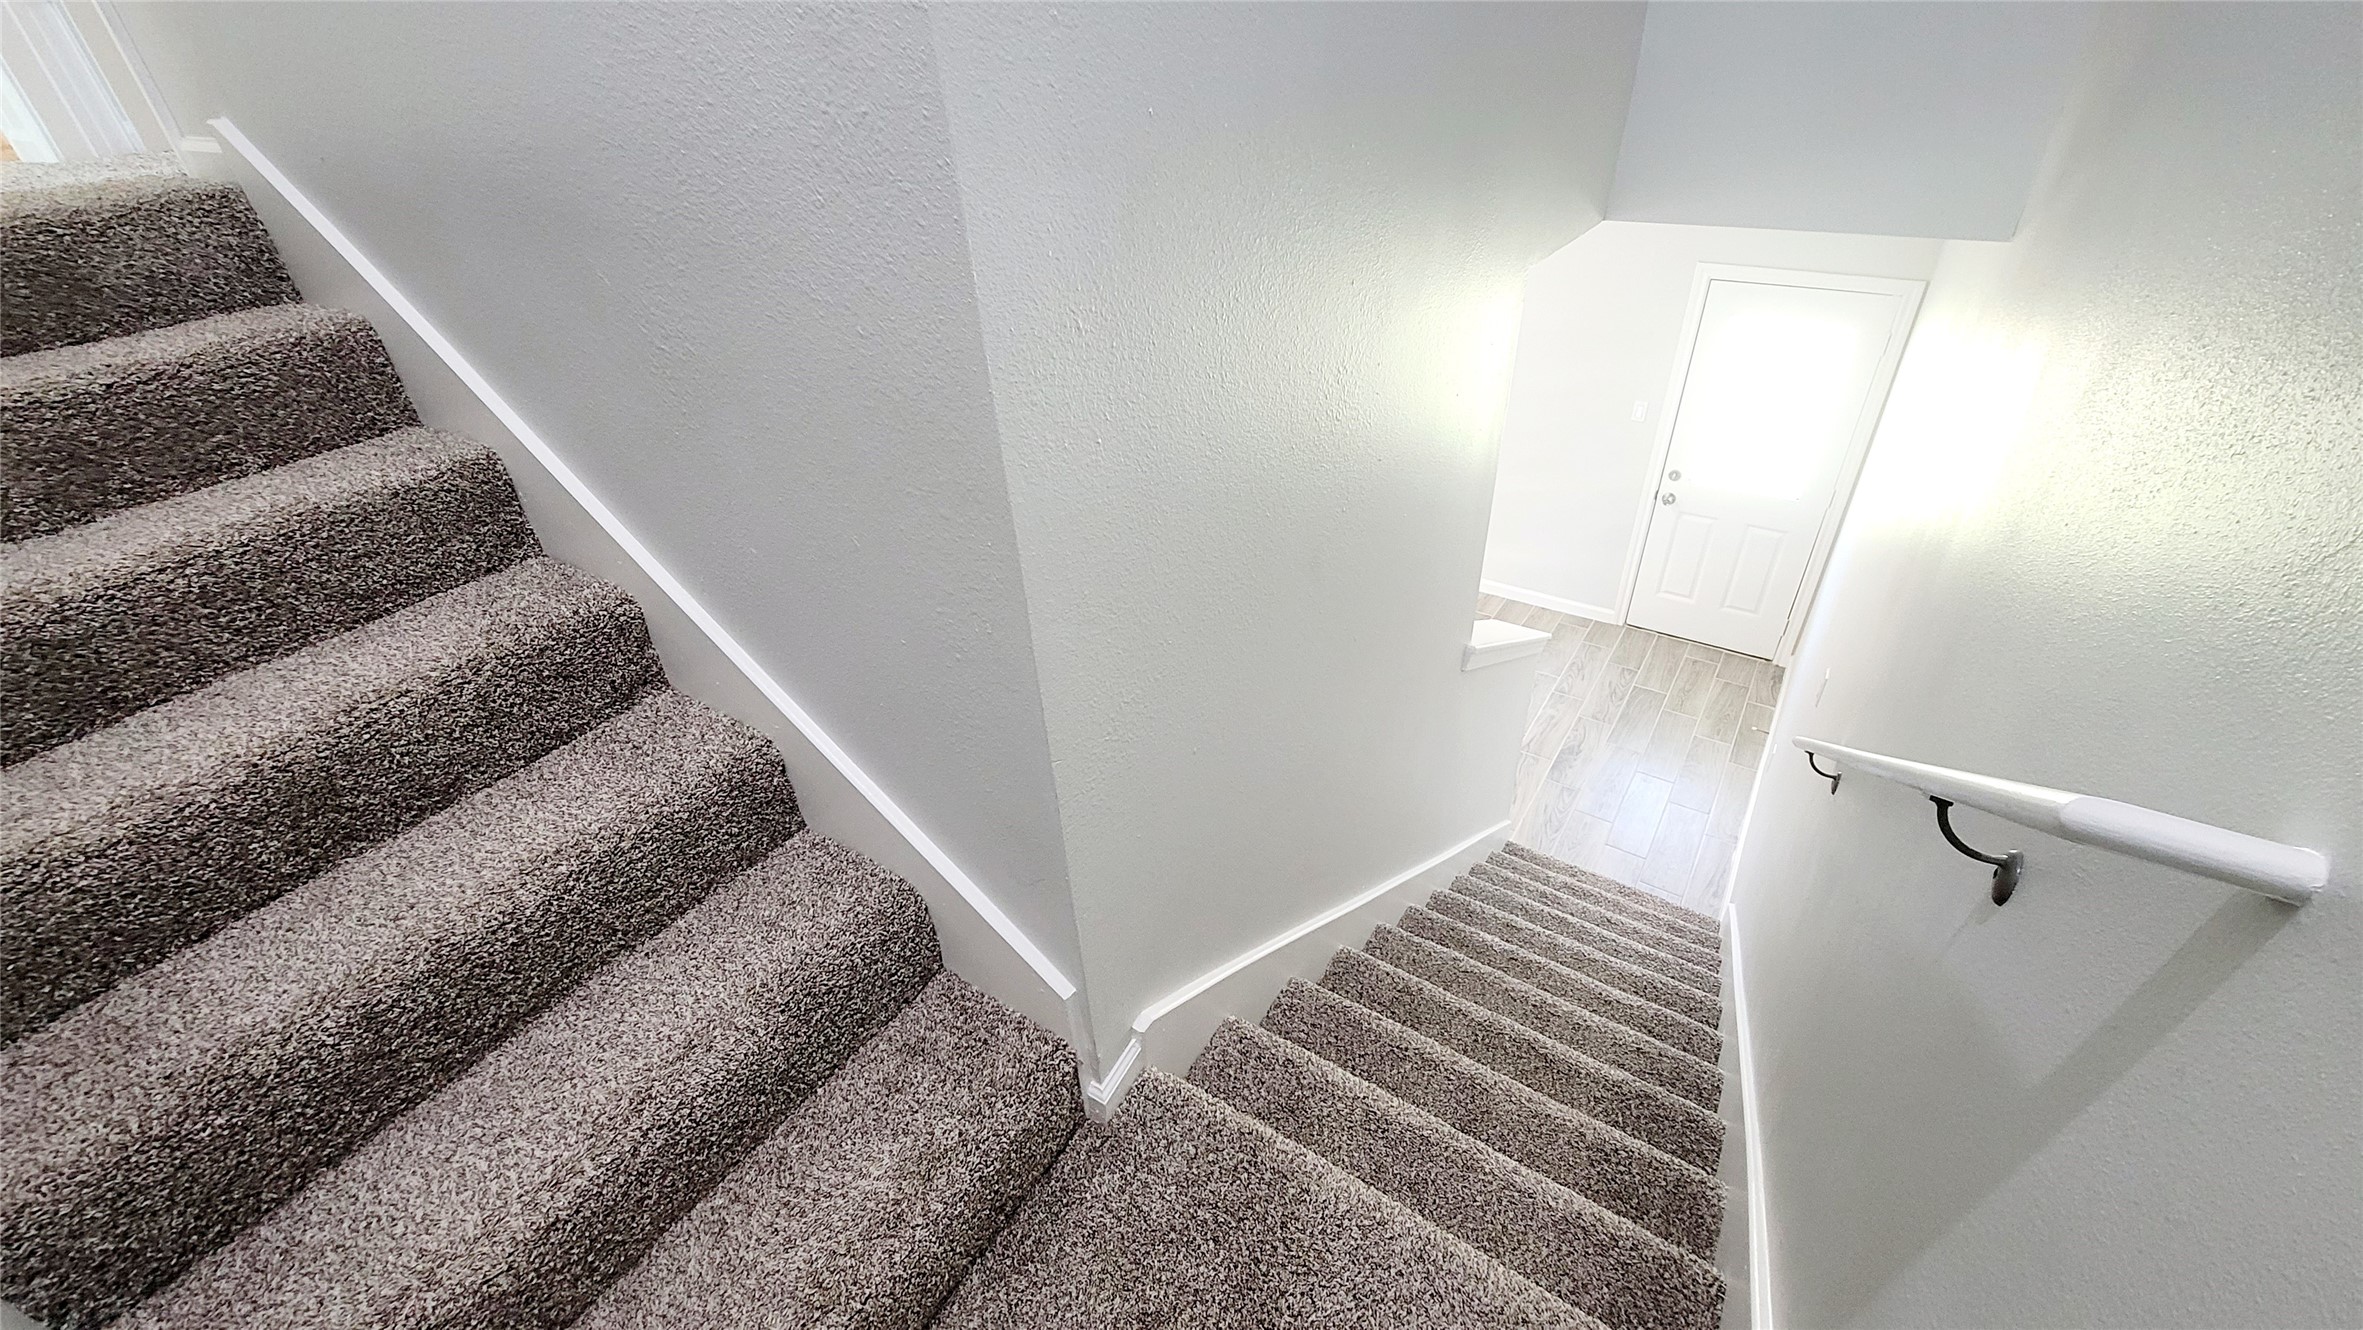 Wrap around stairs, blessed with soft carpet, great for winter days!